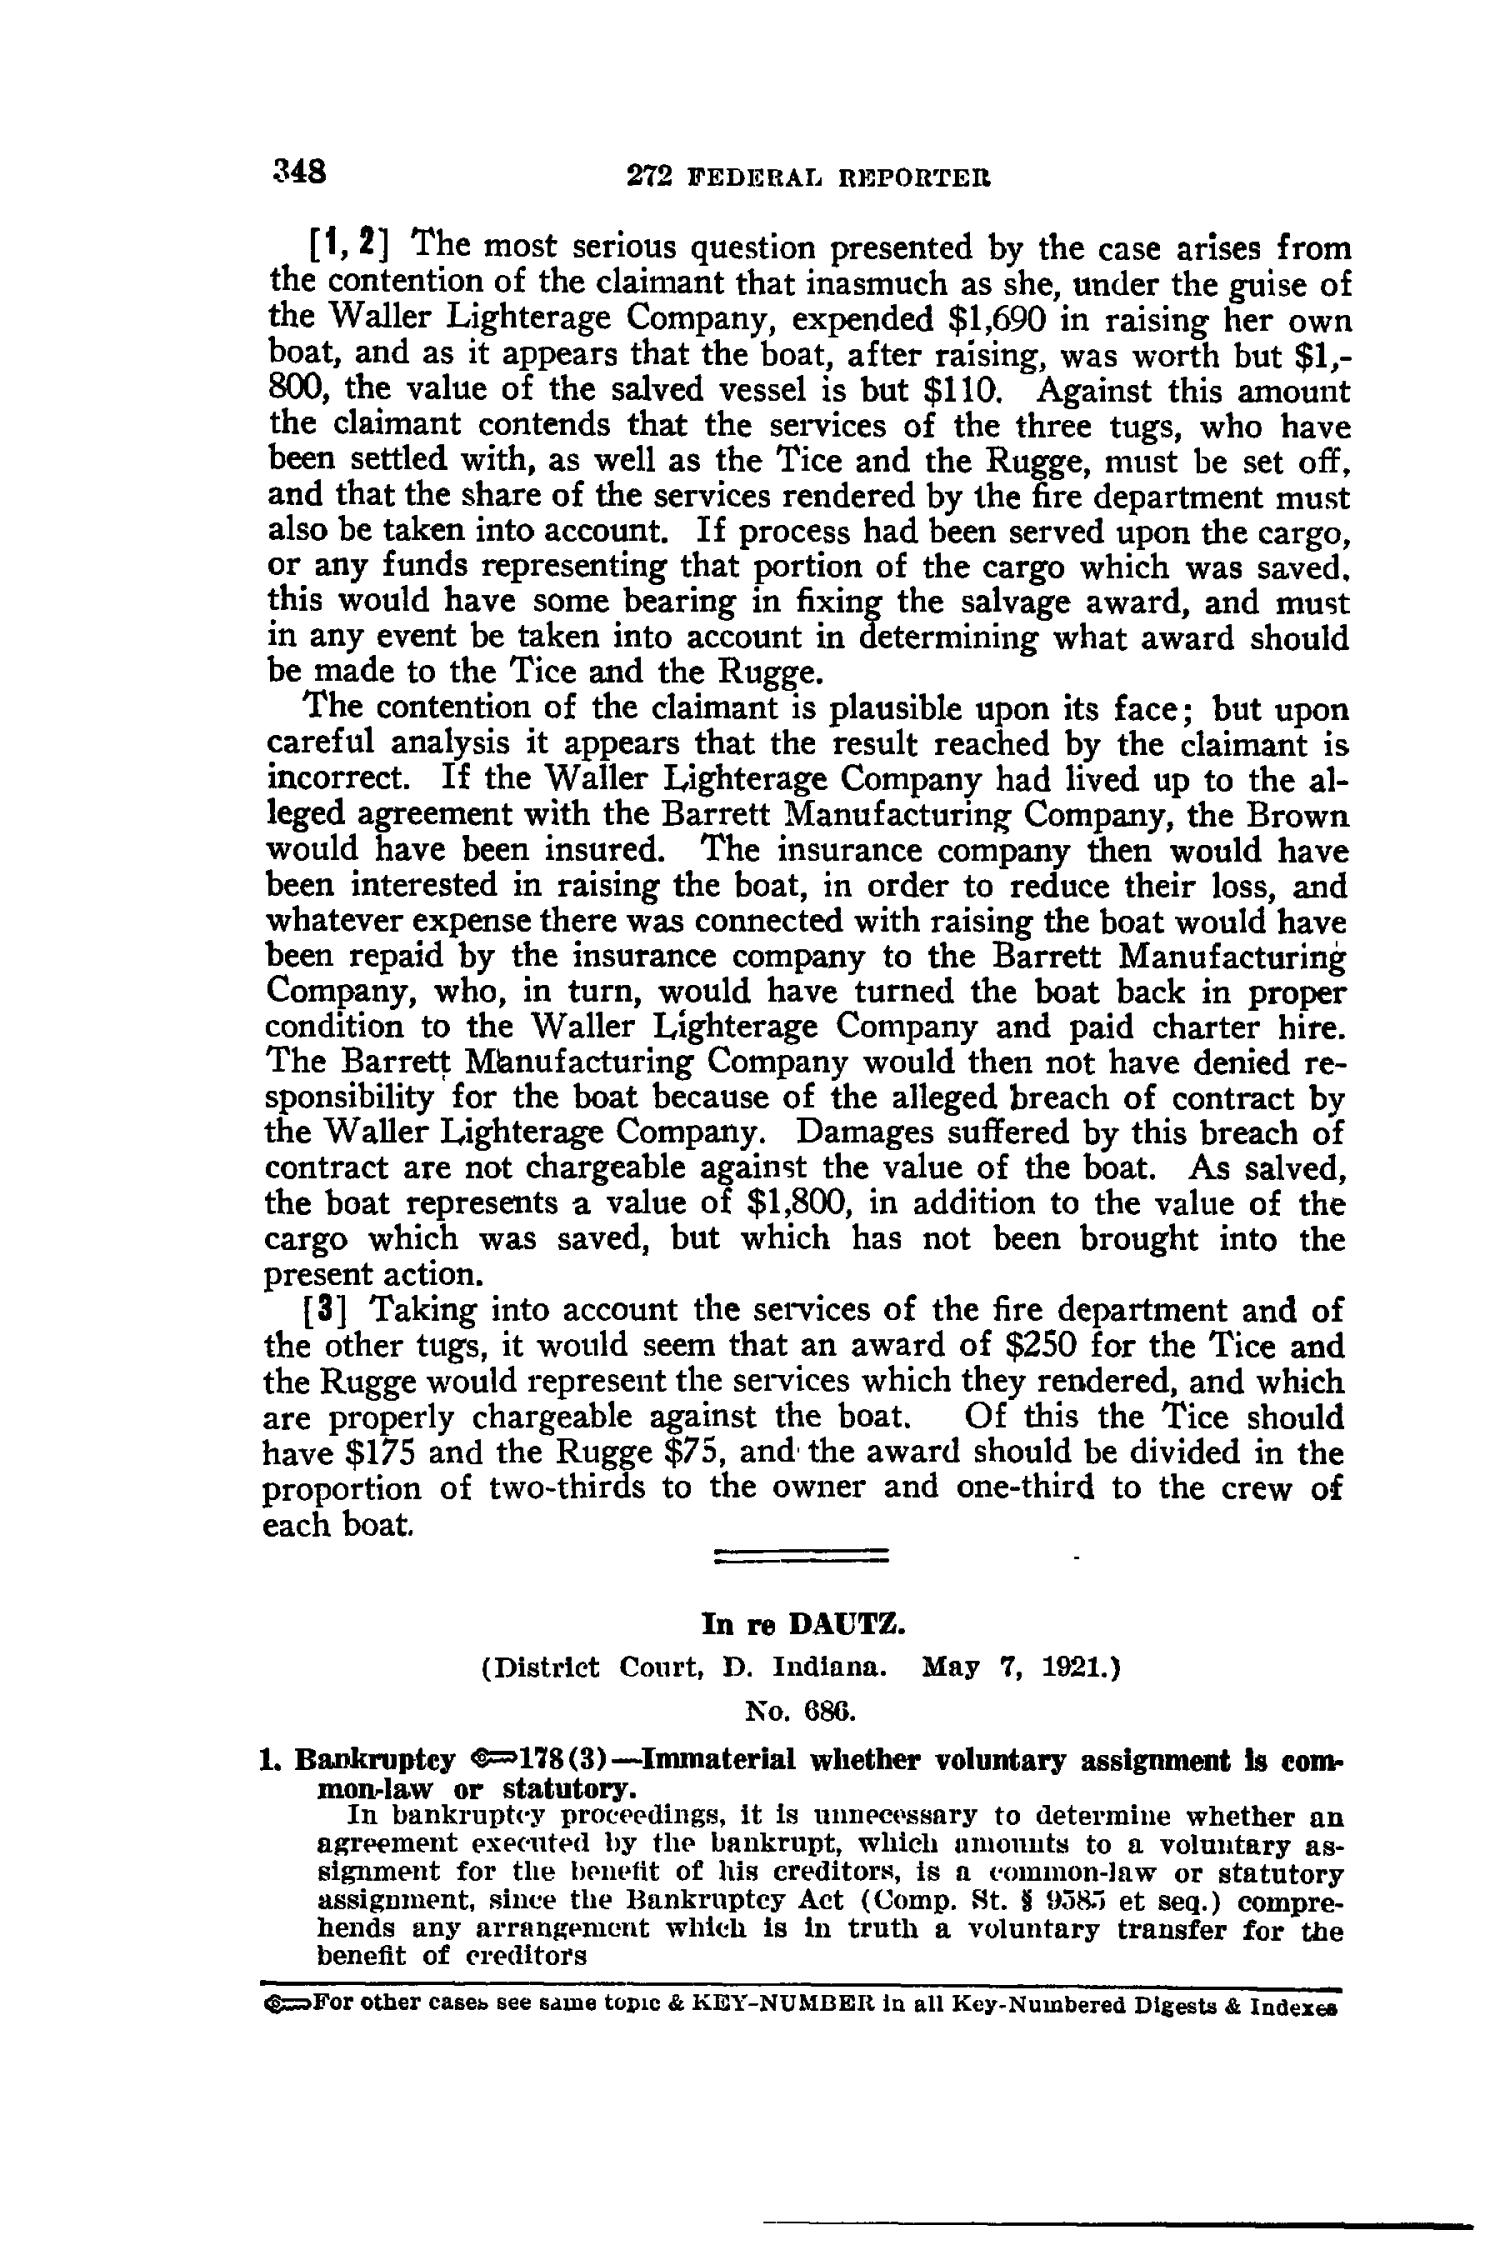 The Federal Reporter with Key-Number Annotations, Volume 272: Cases Argued and Determined in the Circuit Courts of Appeals and District Courts of the United States and the Court of Appeals in the District of Columbia,  June-August, 1921.
                                                
                                                    348
                                                